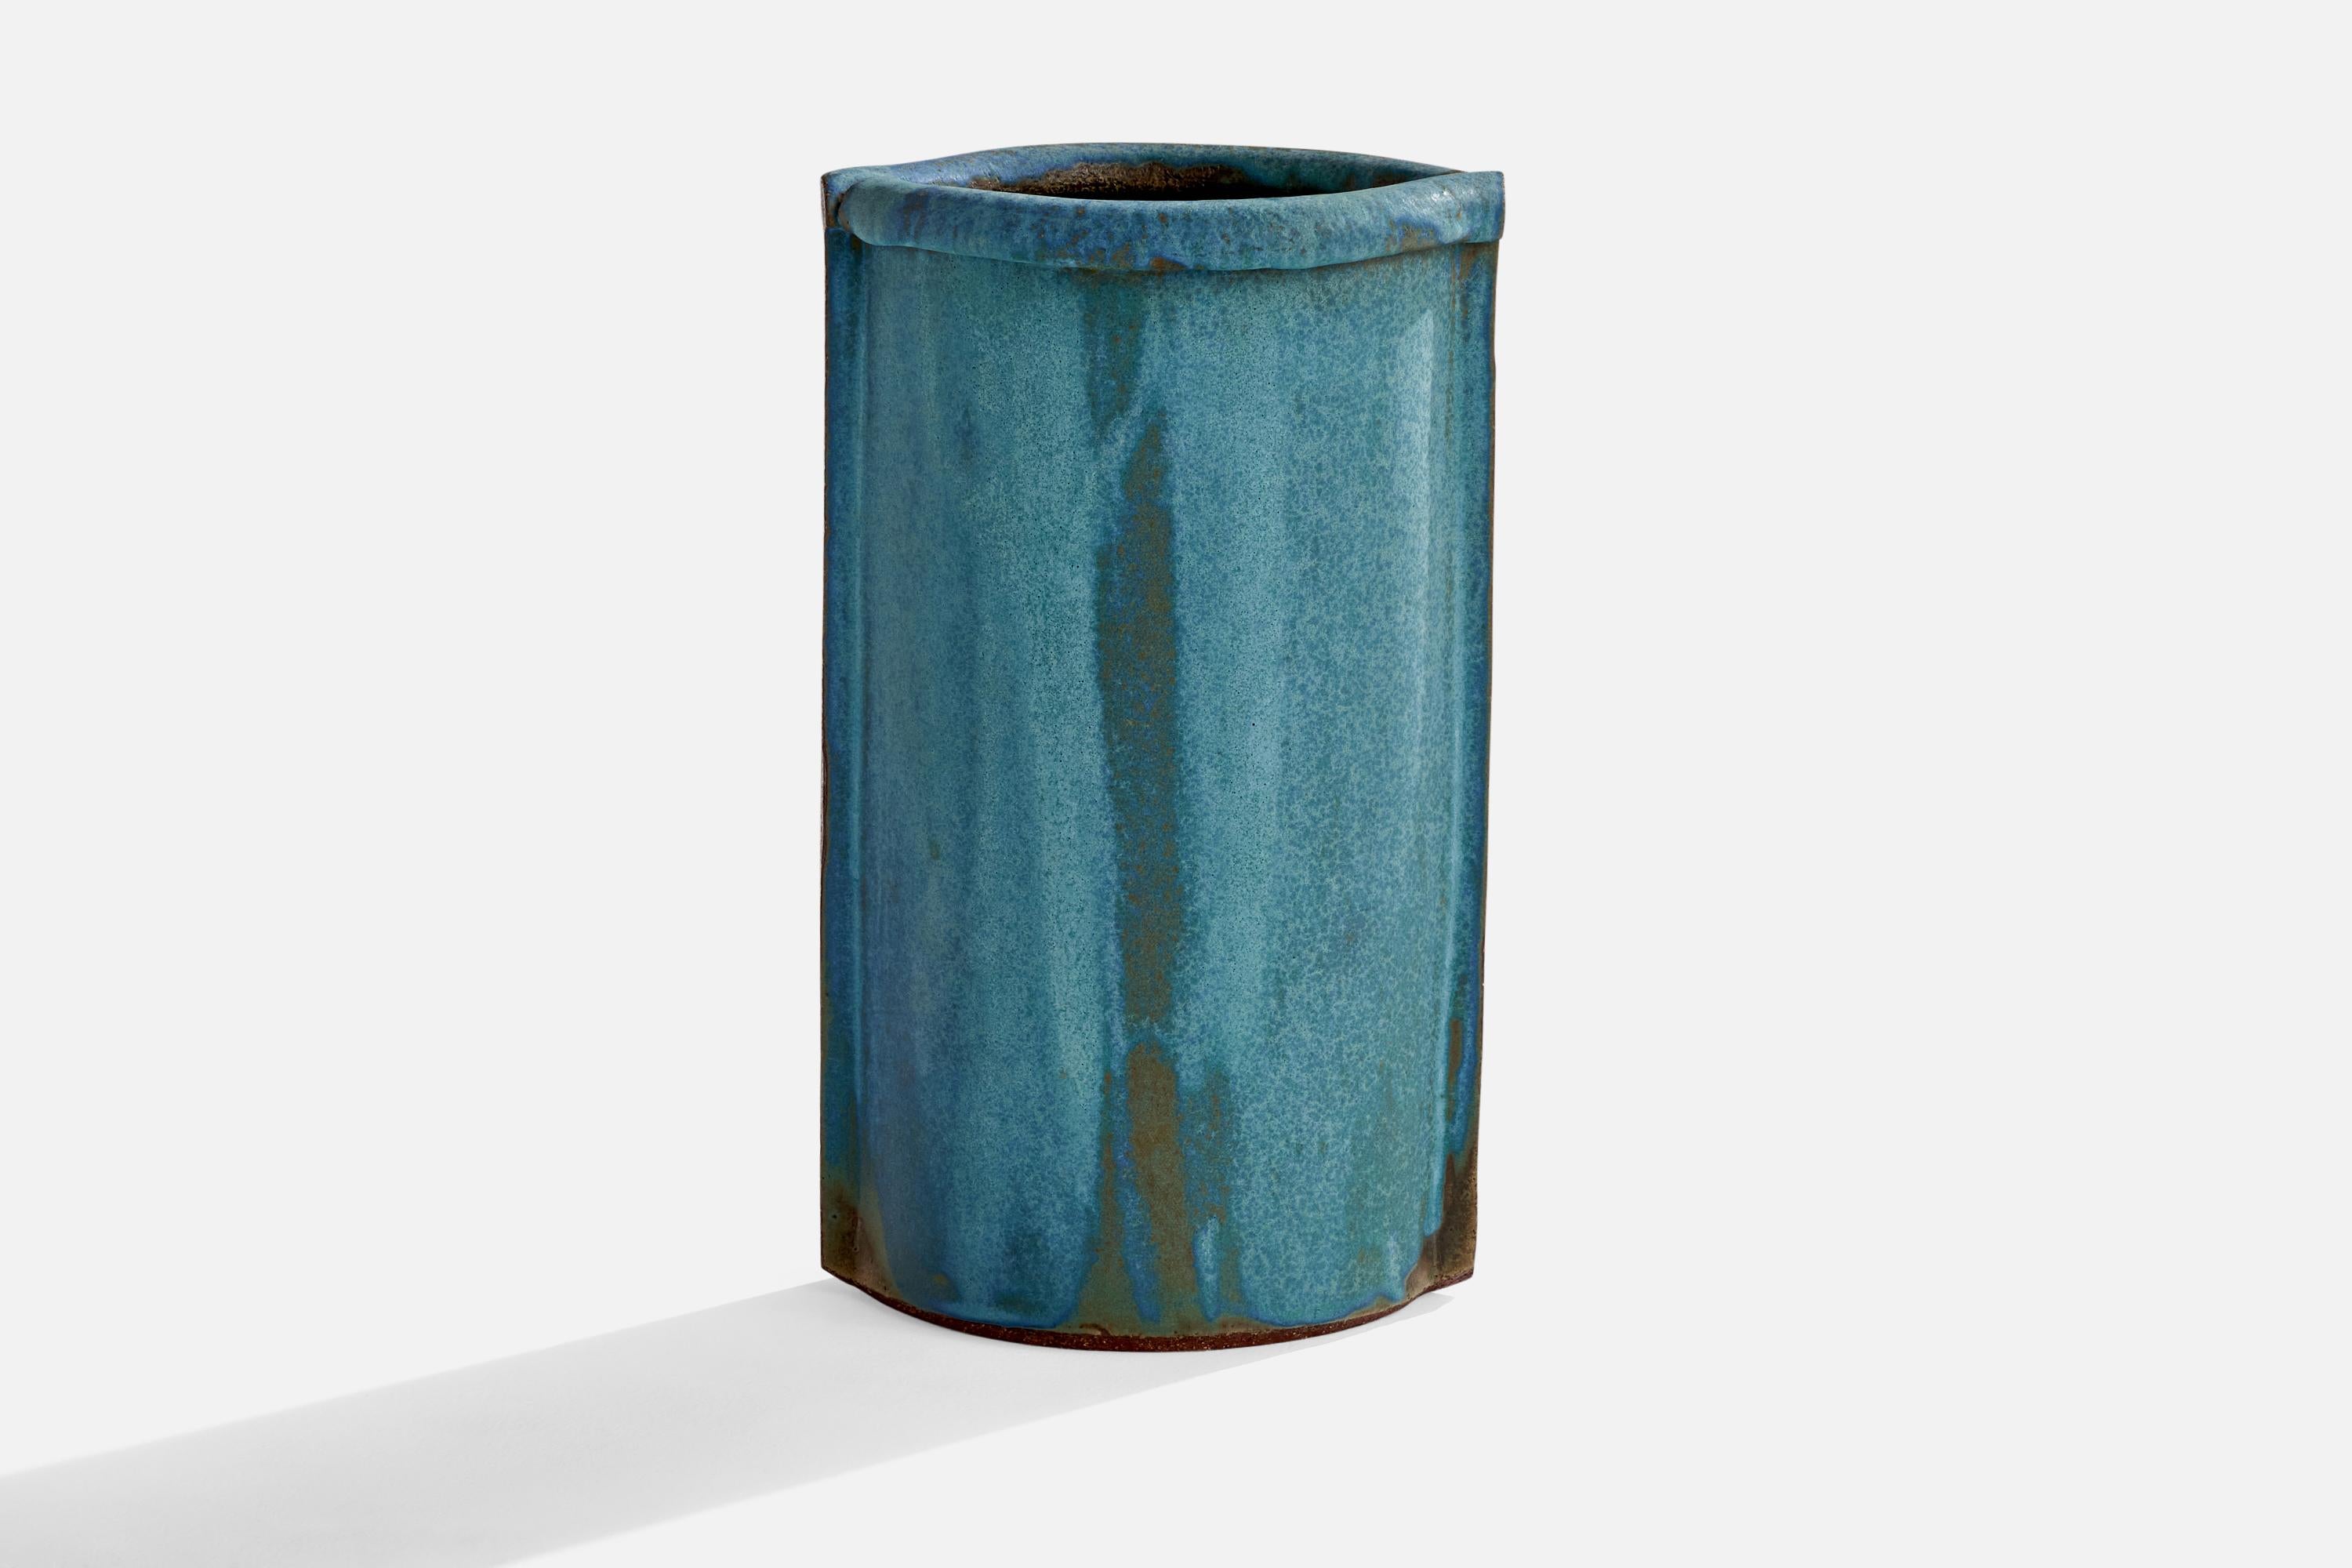 A sizeable blue-glazed ceramic vase designed and produced in Denmark, c. 1970s.